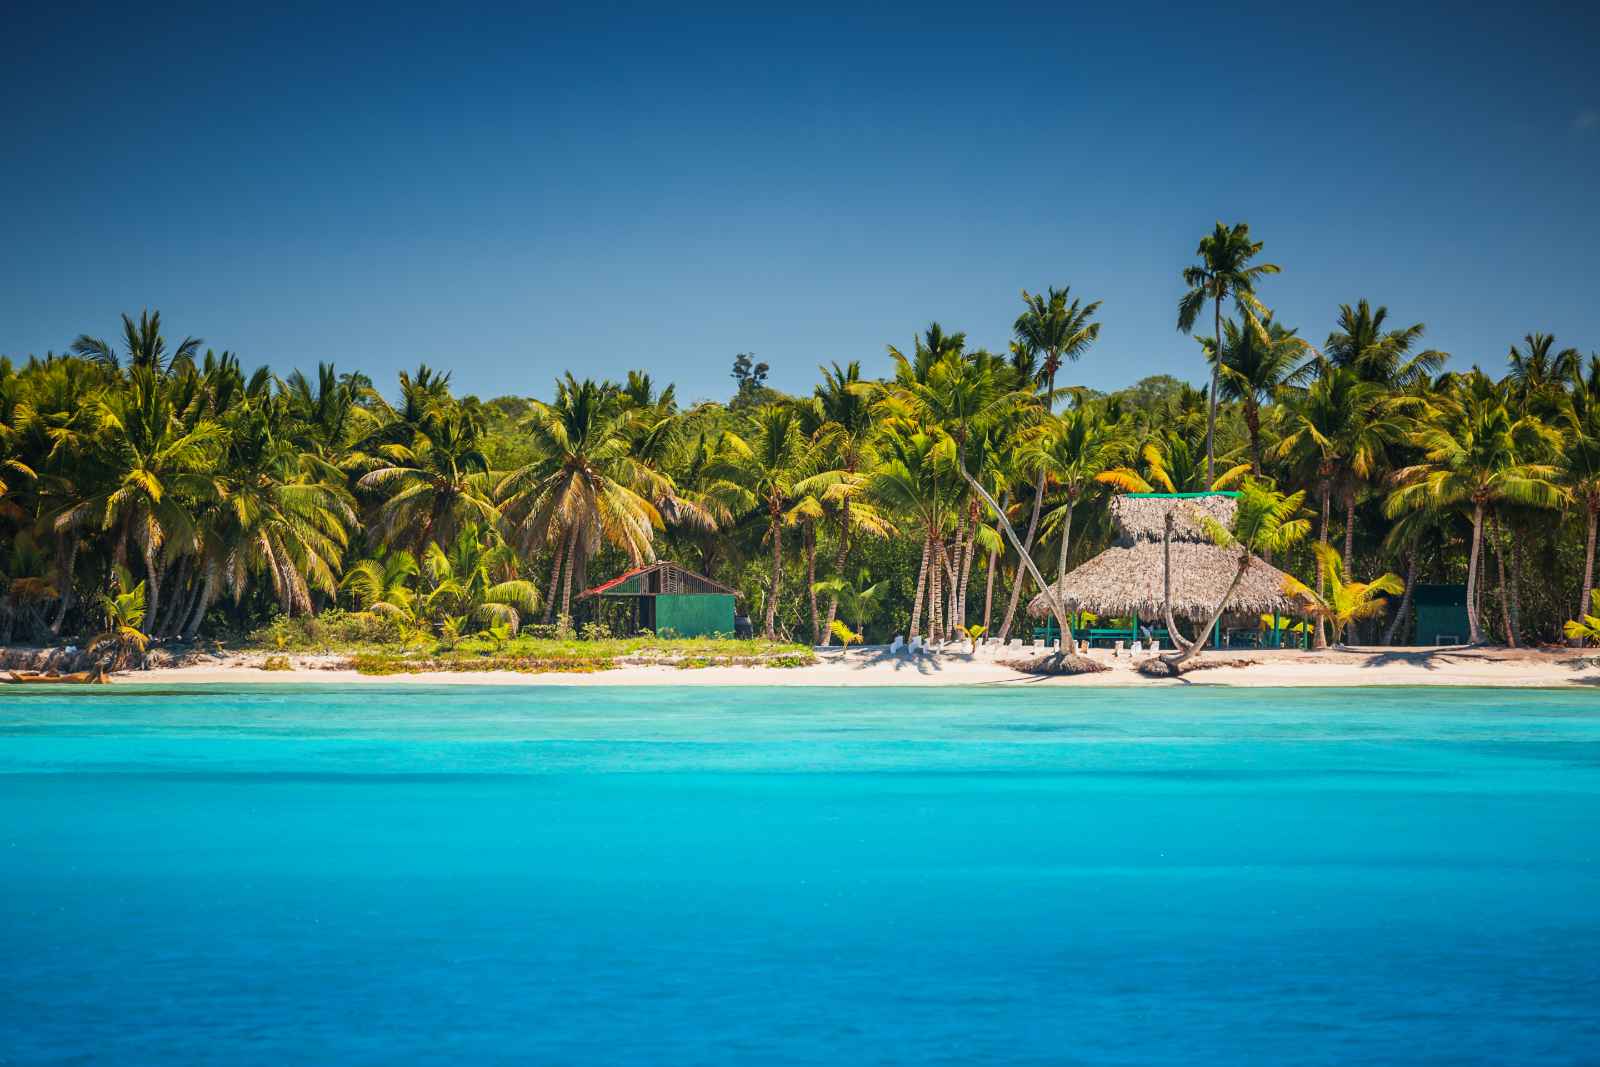 Best Things to do in Punta Cana